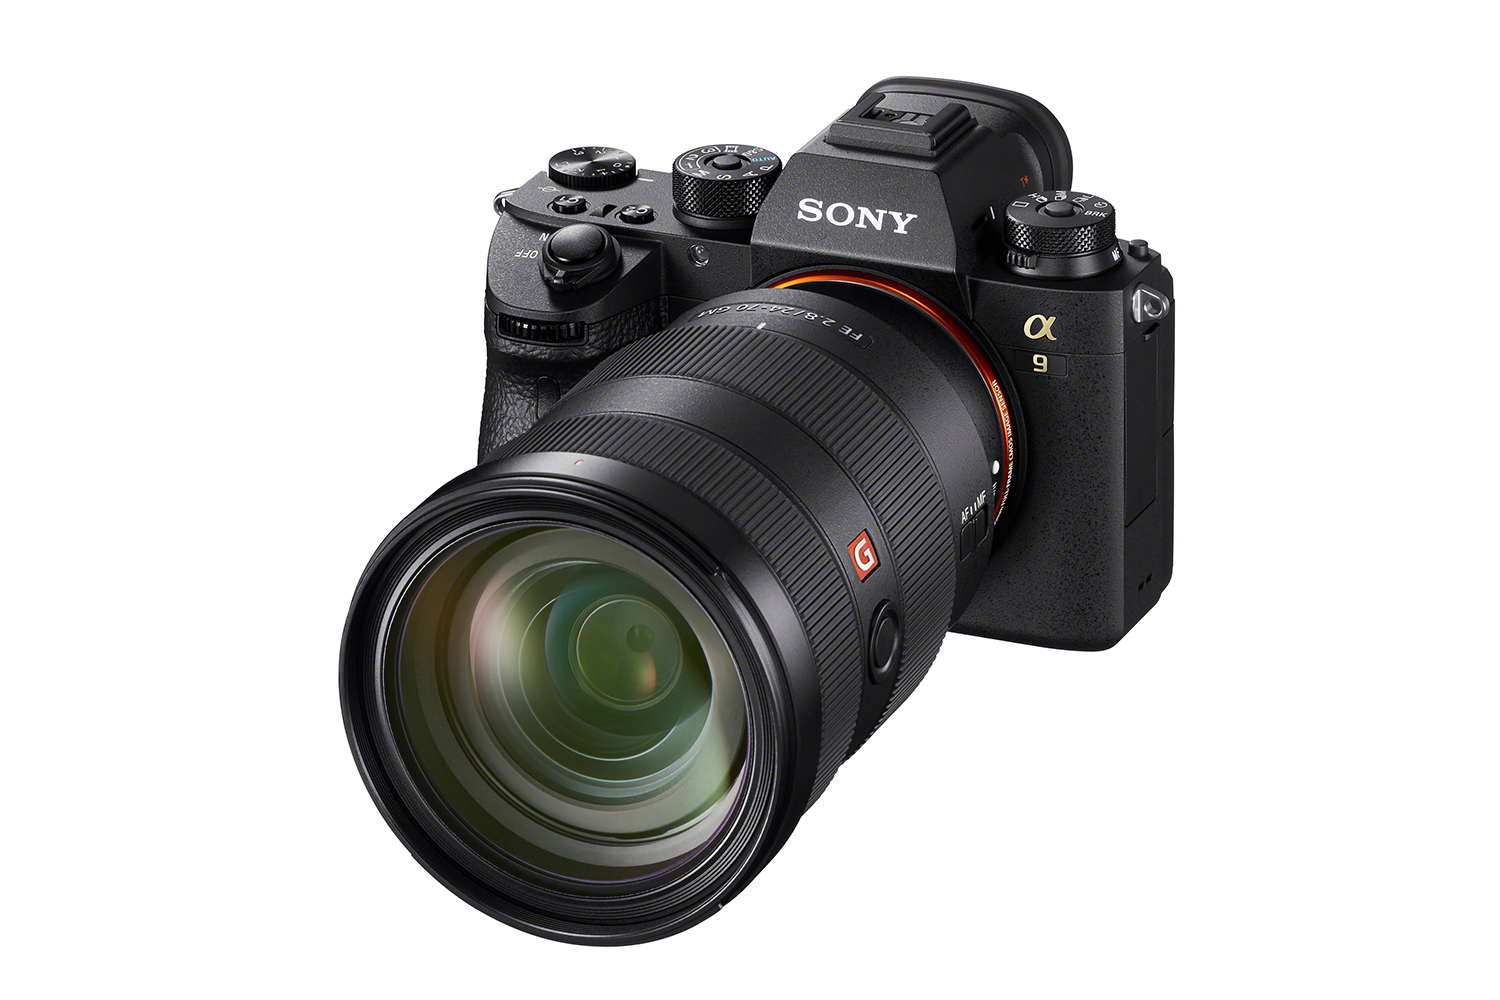 sony a9 full frame camera announced ilce 9 fe2470gm right large